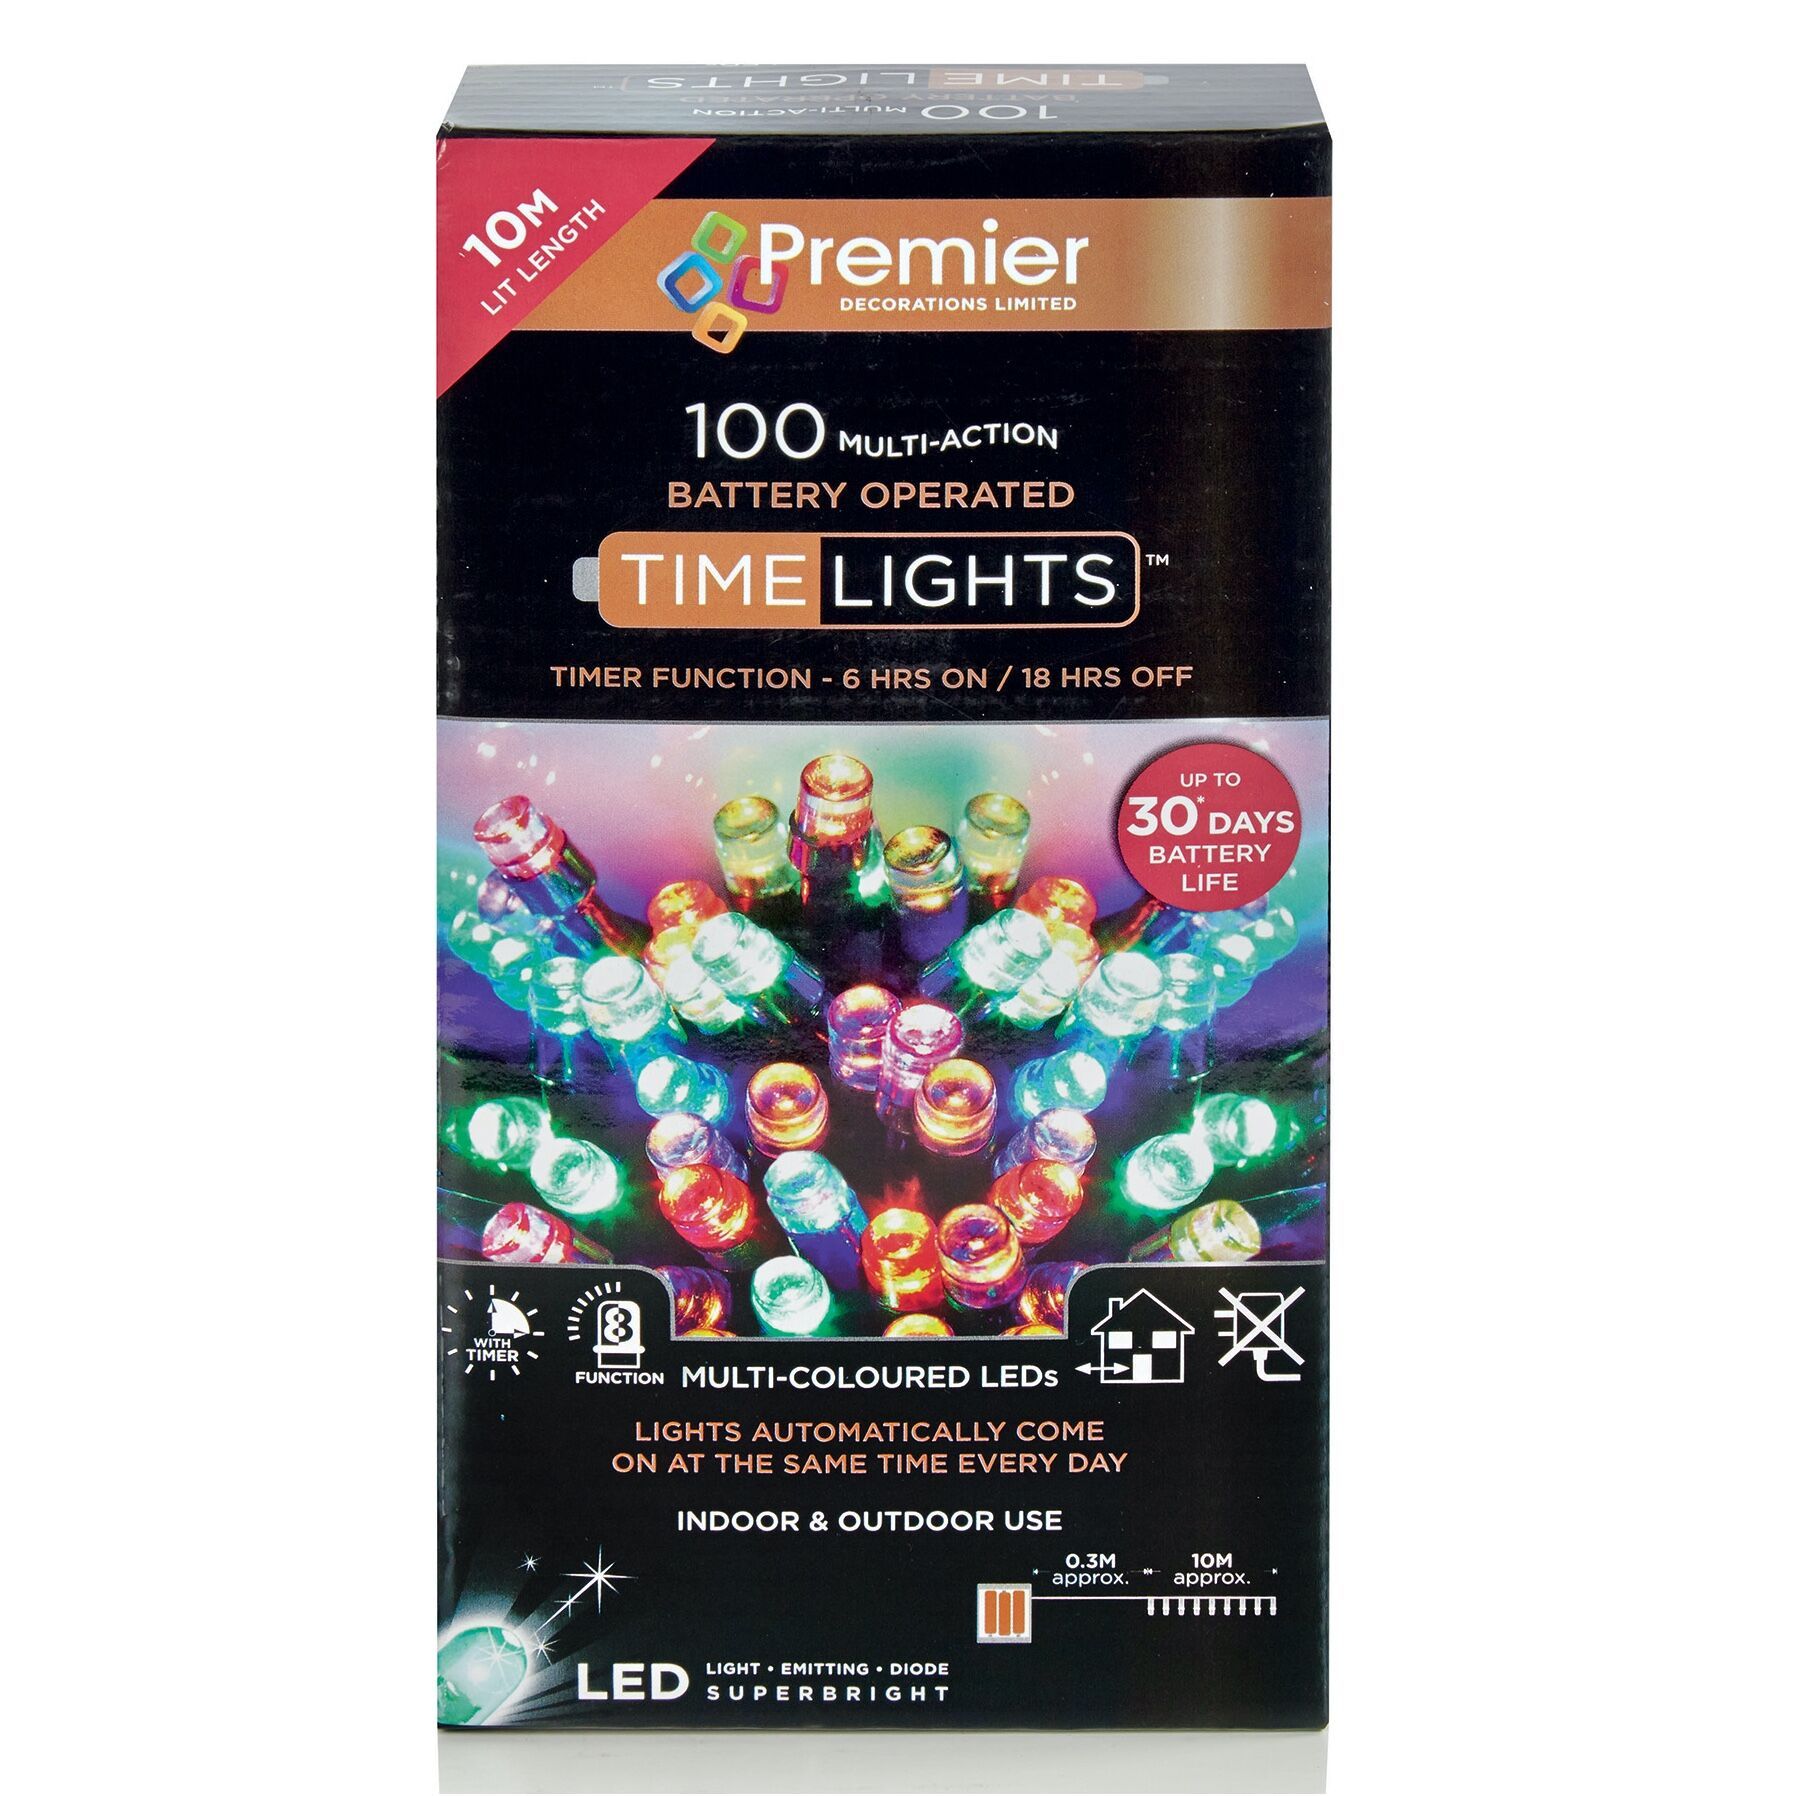 Nitelights 100 Battery-Operated Multi-Action LED Lights (Multicolor) - Premier®